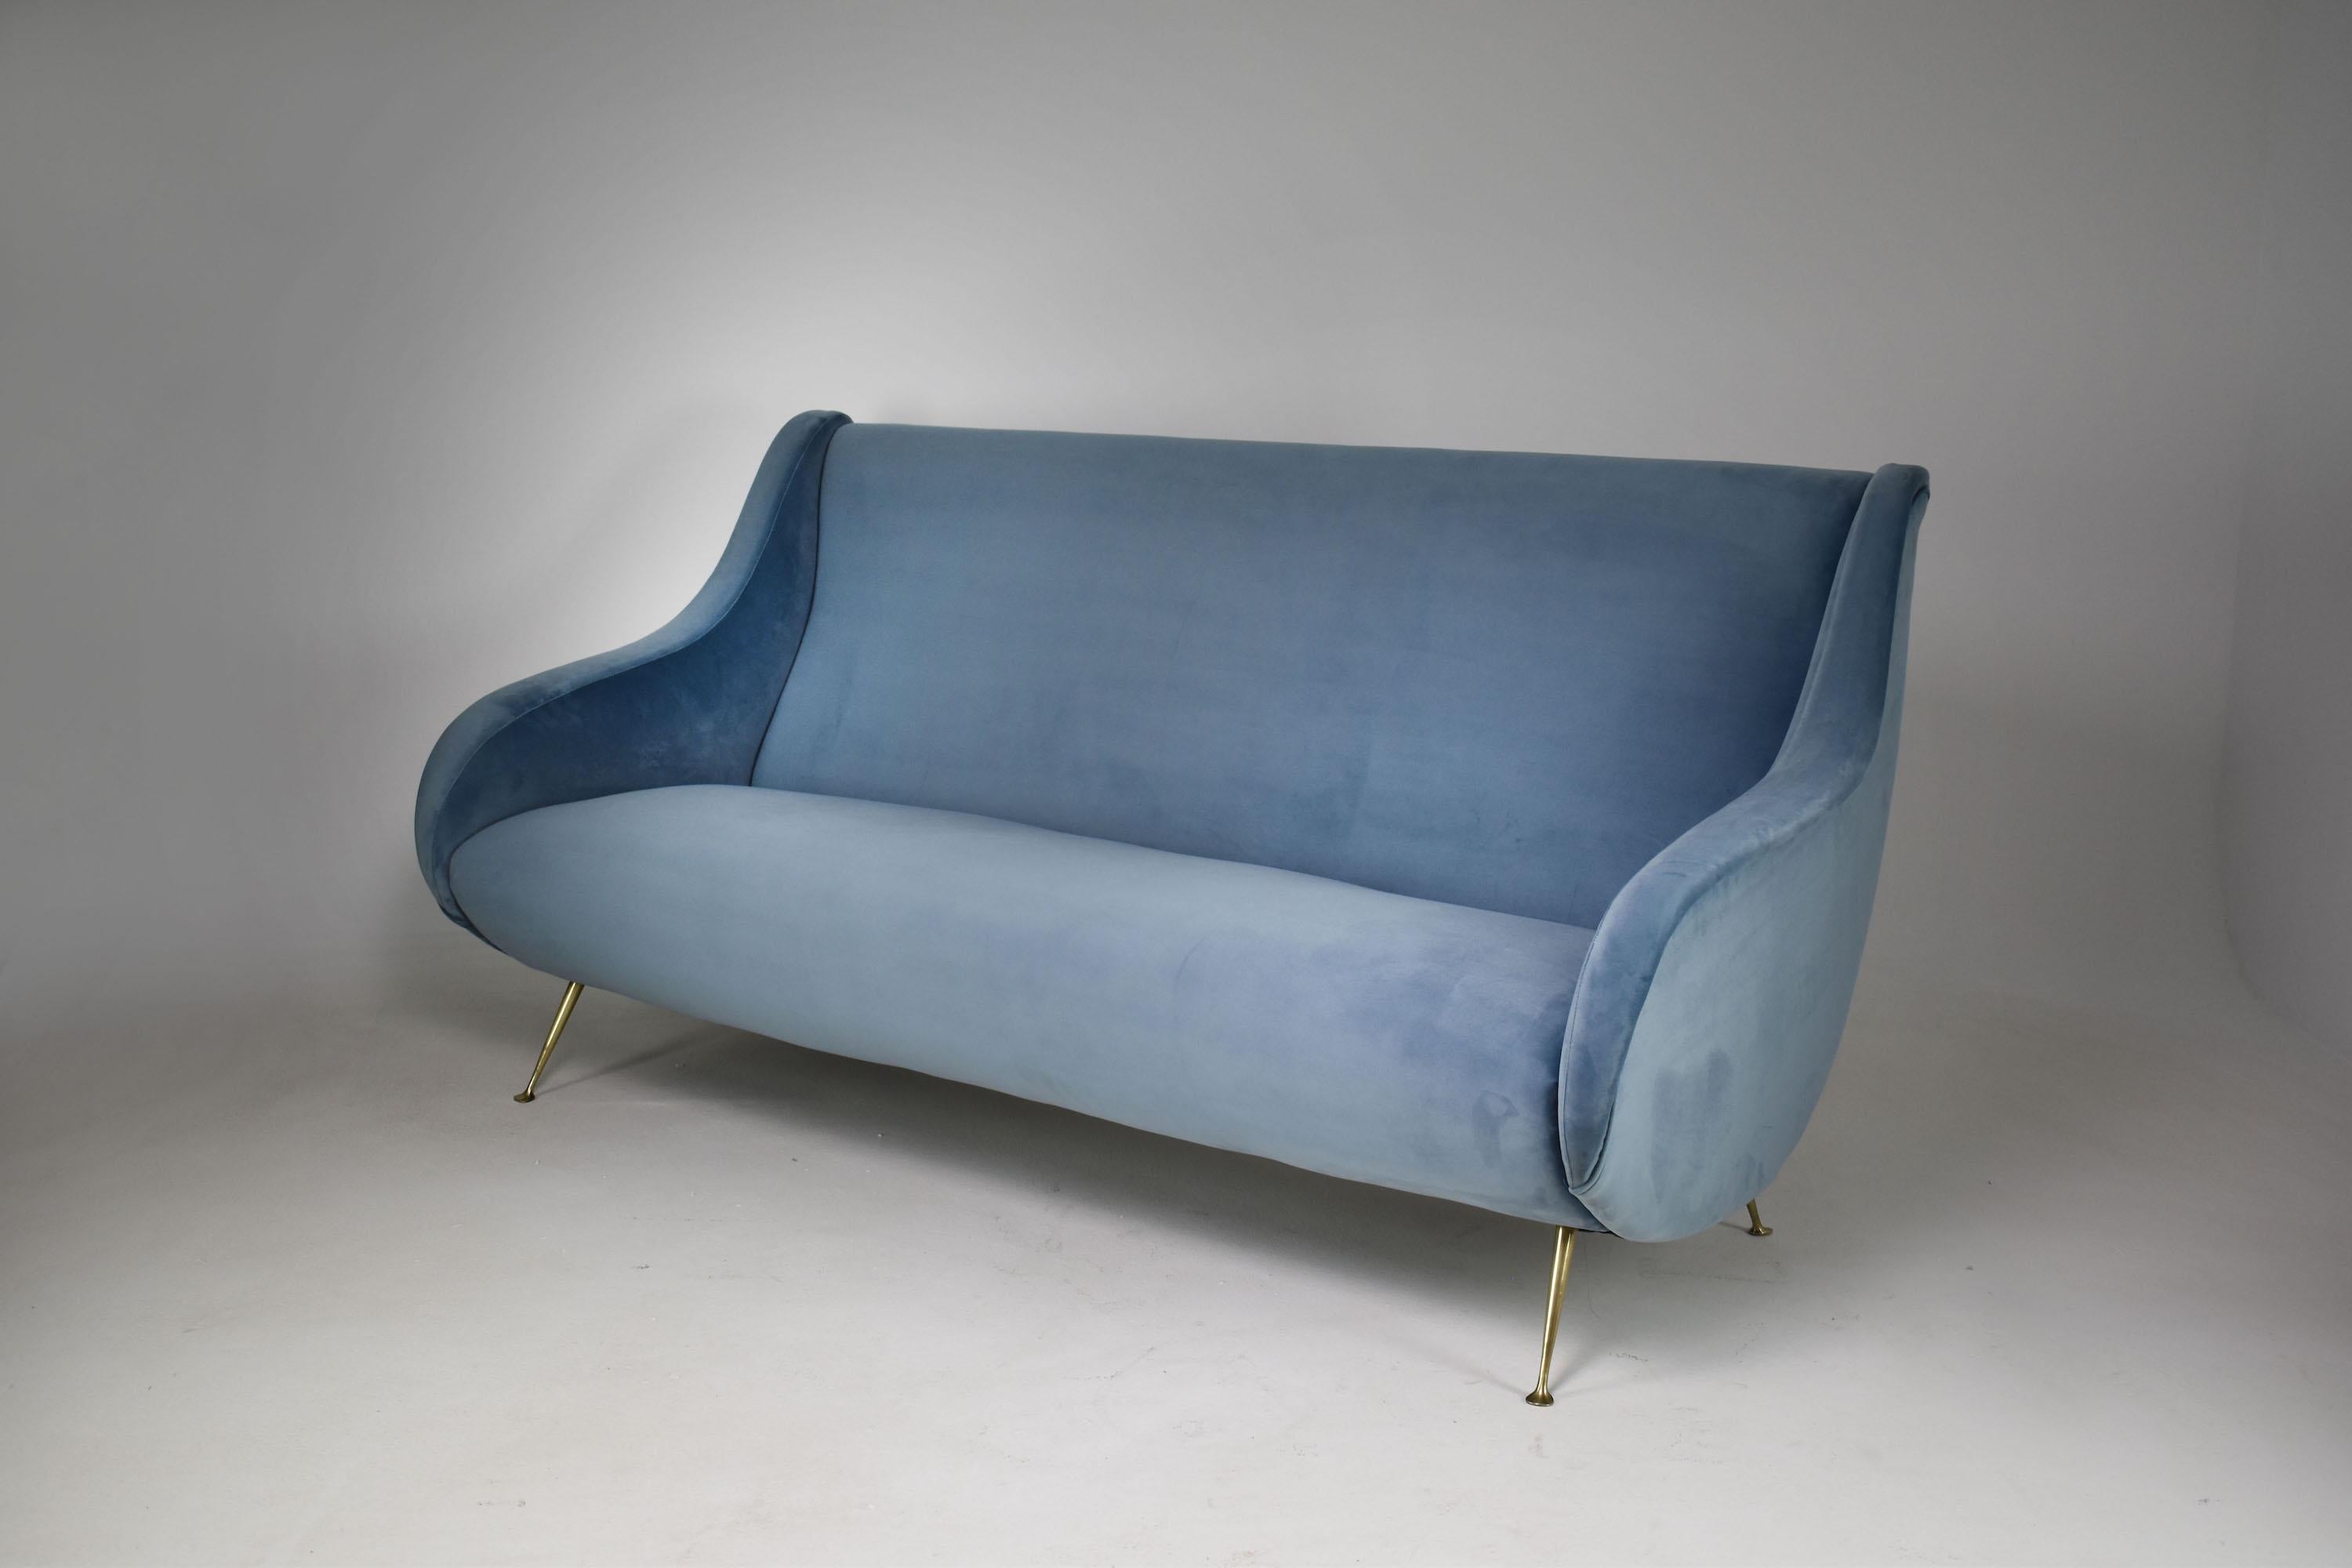 A stunning 20th-century vintage Italian three-seater sofa designed with beautiful curves, fully, expertly restored with new light blue velvet upholstery and foam padding. 
Italy 1950's 

-------

We are an exhibition space and an online